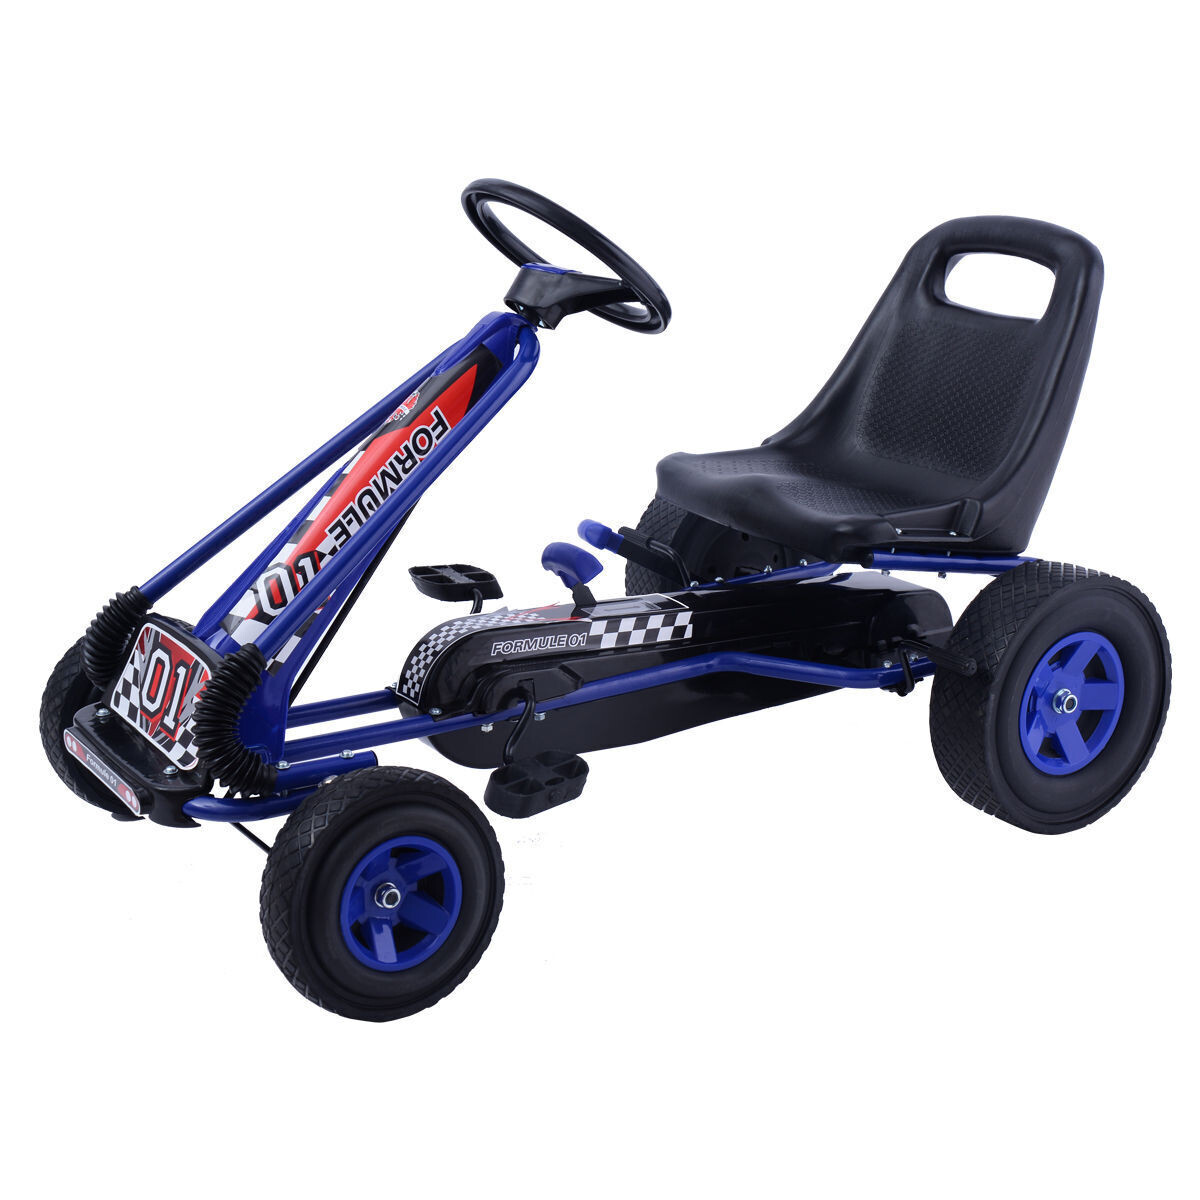 4 Wheels Kids Ride On Pedal Powered Bike Go Kart Racer Car Outdoor Play Toy-Blue - Color: Blue